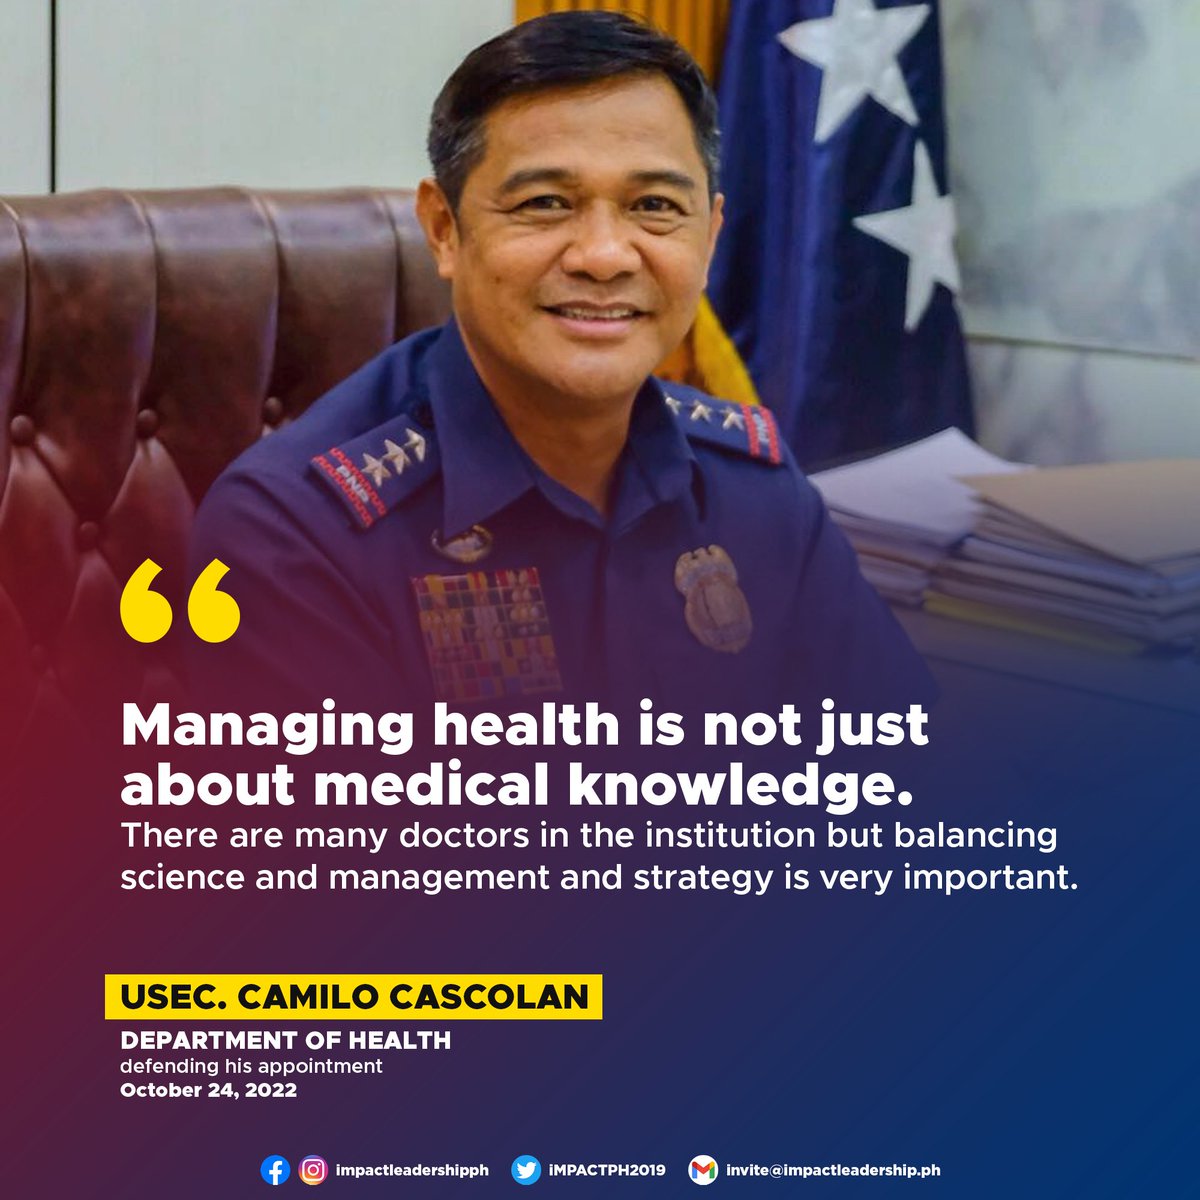 'MANAGING HEALTH IS NOT JUST ABOUT MEDICAL KNOWLEDGE' Former Philippine National Police (PNP) chief Camilo Cascolan defends his appointment as Undersecretary of the Department of Health (DOH).